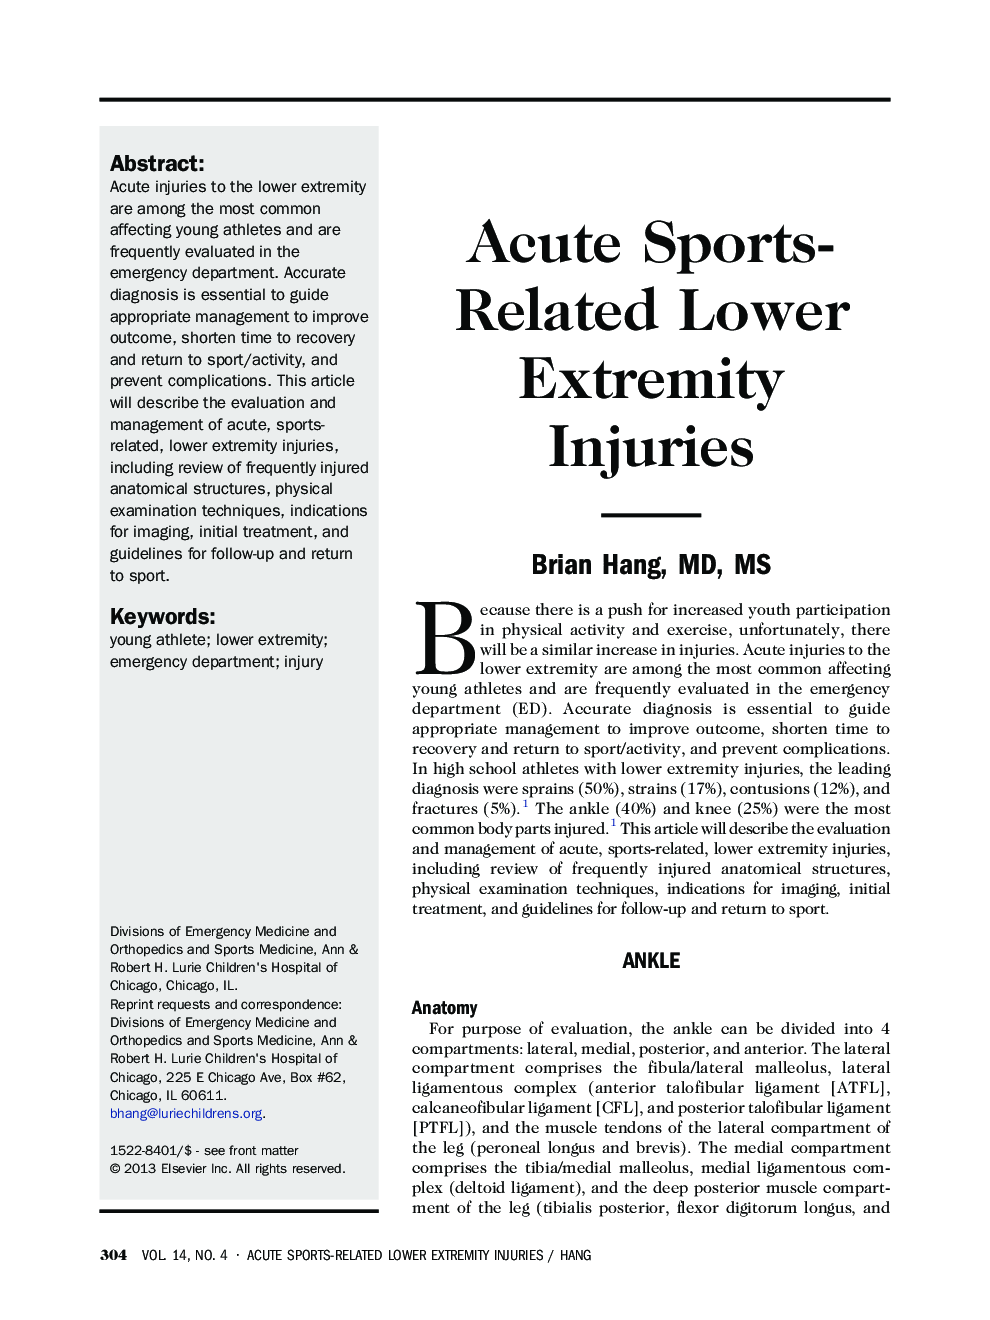 Acute Sports-Related Lower Extremity Injuries